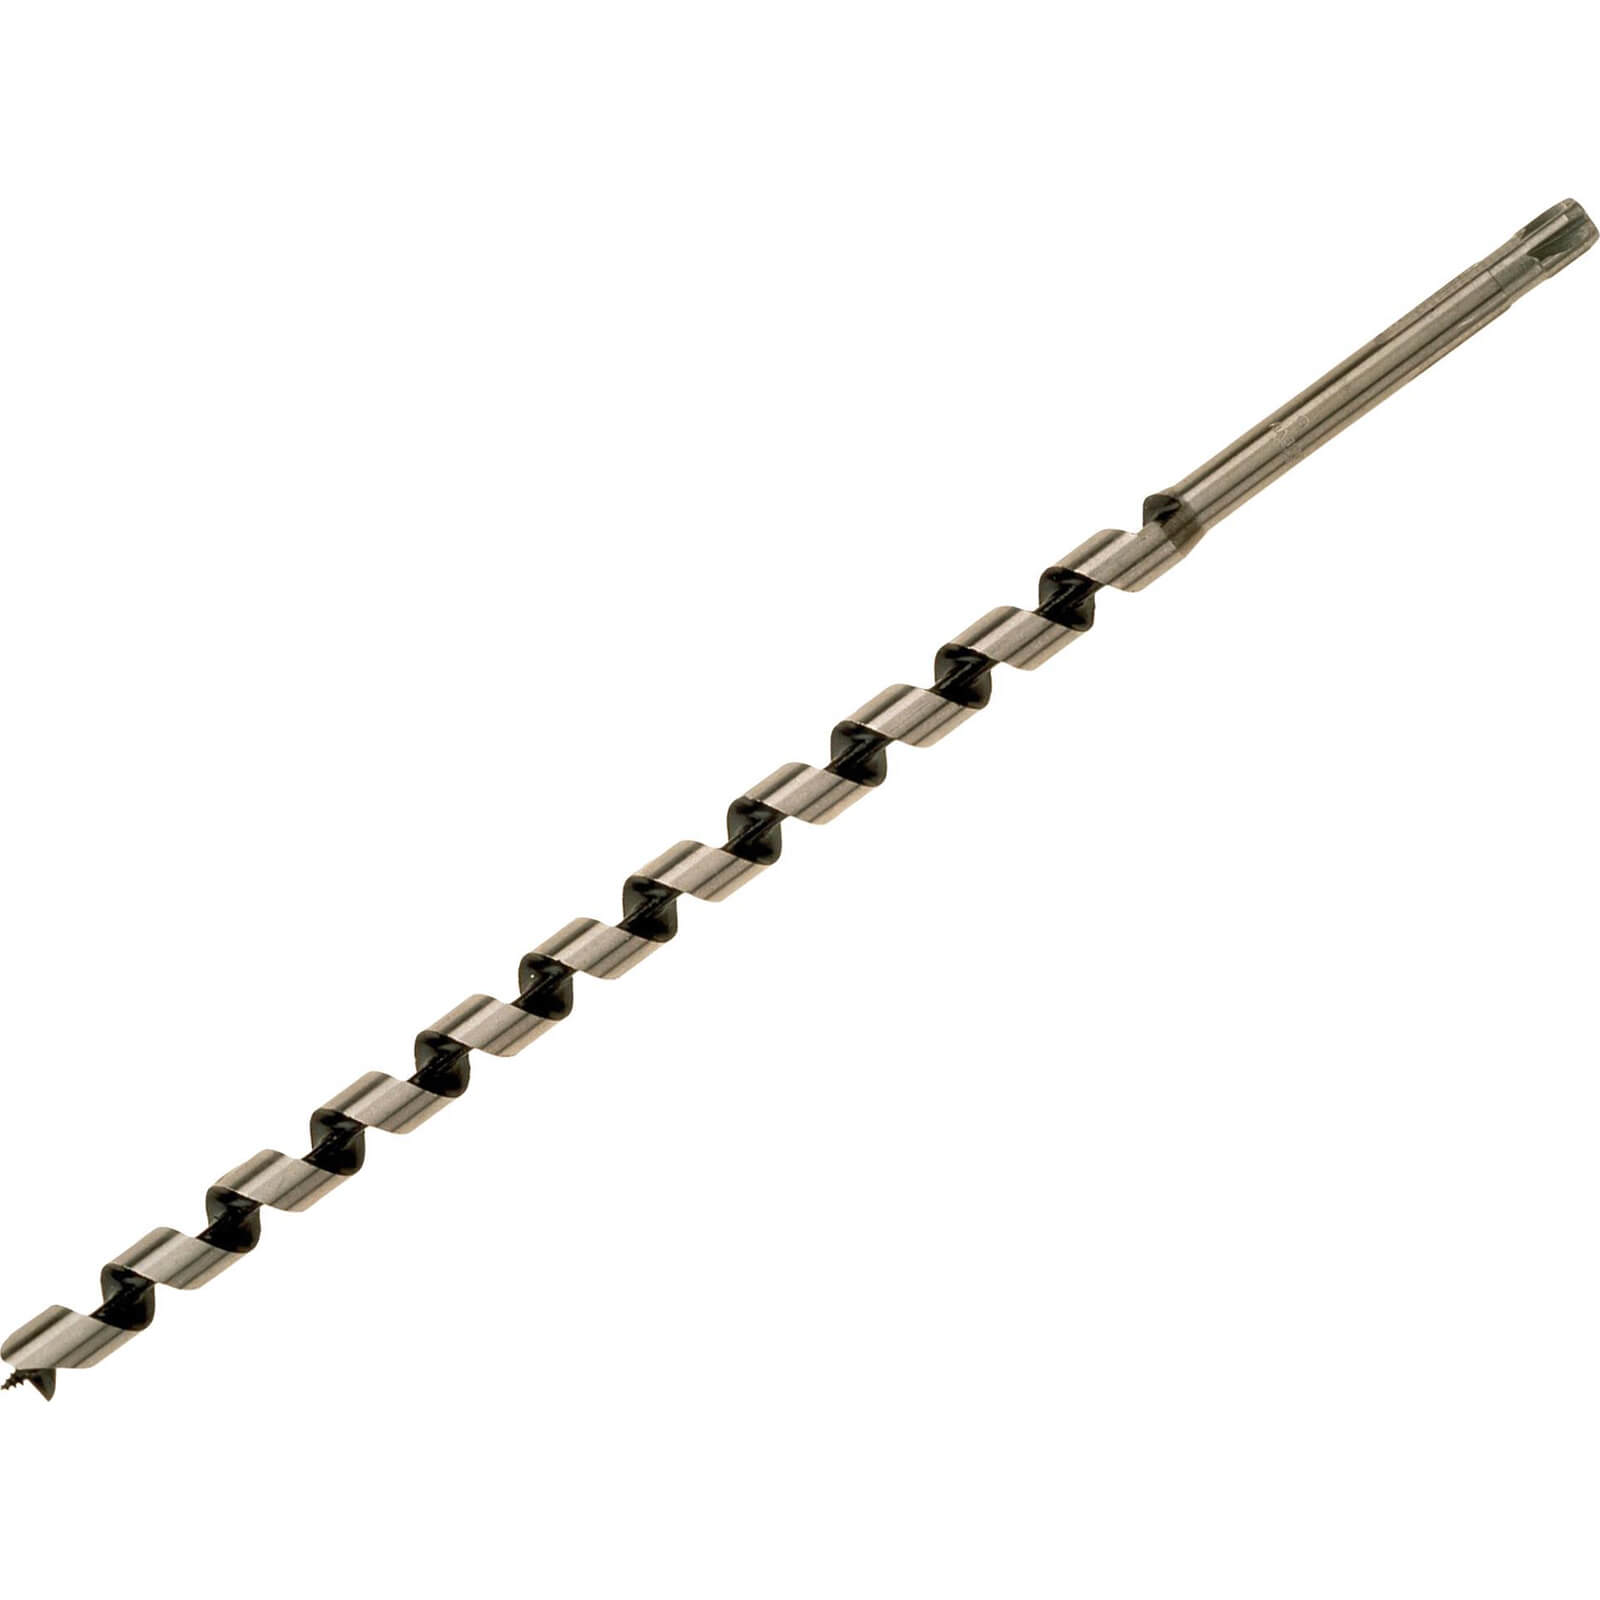 Photo of Bahco 9627 Series Long Combination Auger Drill Bit 18mm 460mm